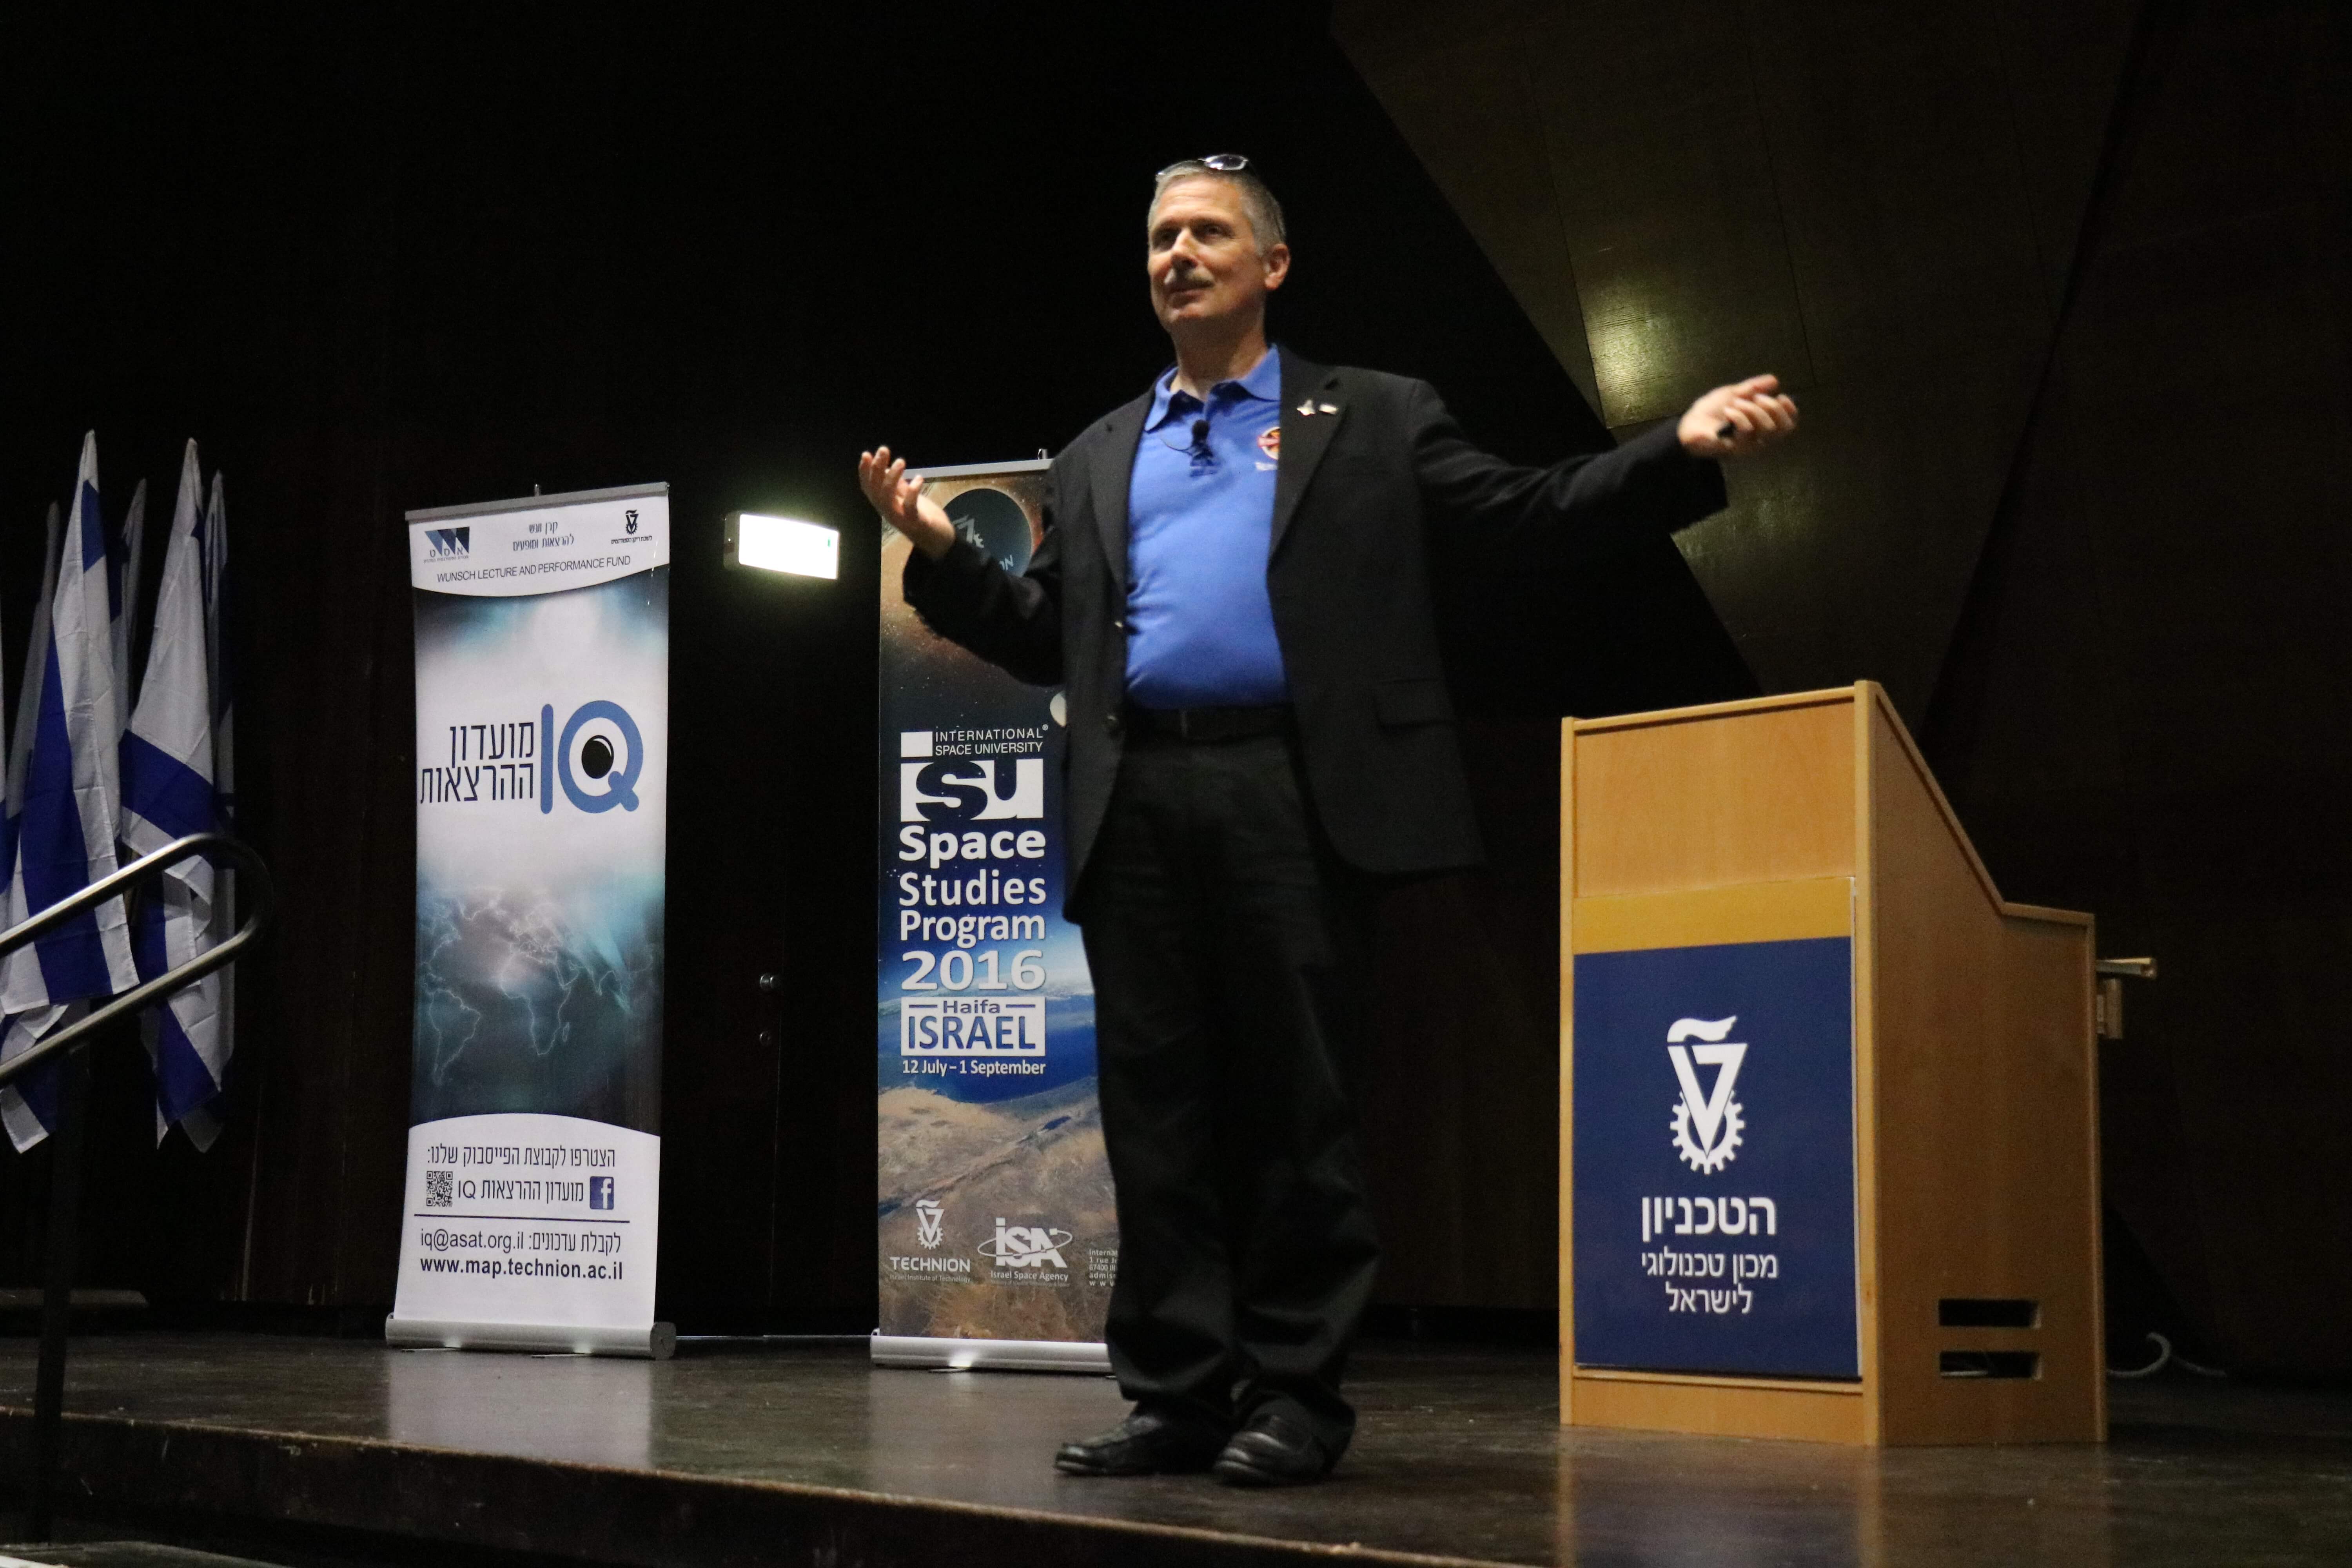 John Connolly in a lecture at the Technion. Photo: Technion spokespeople